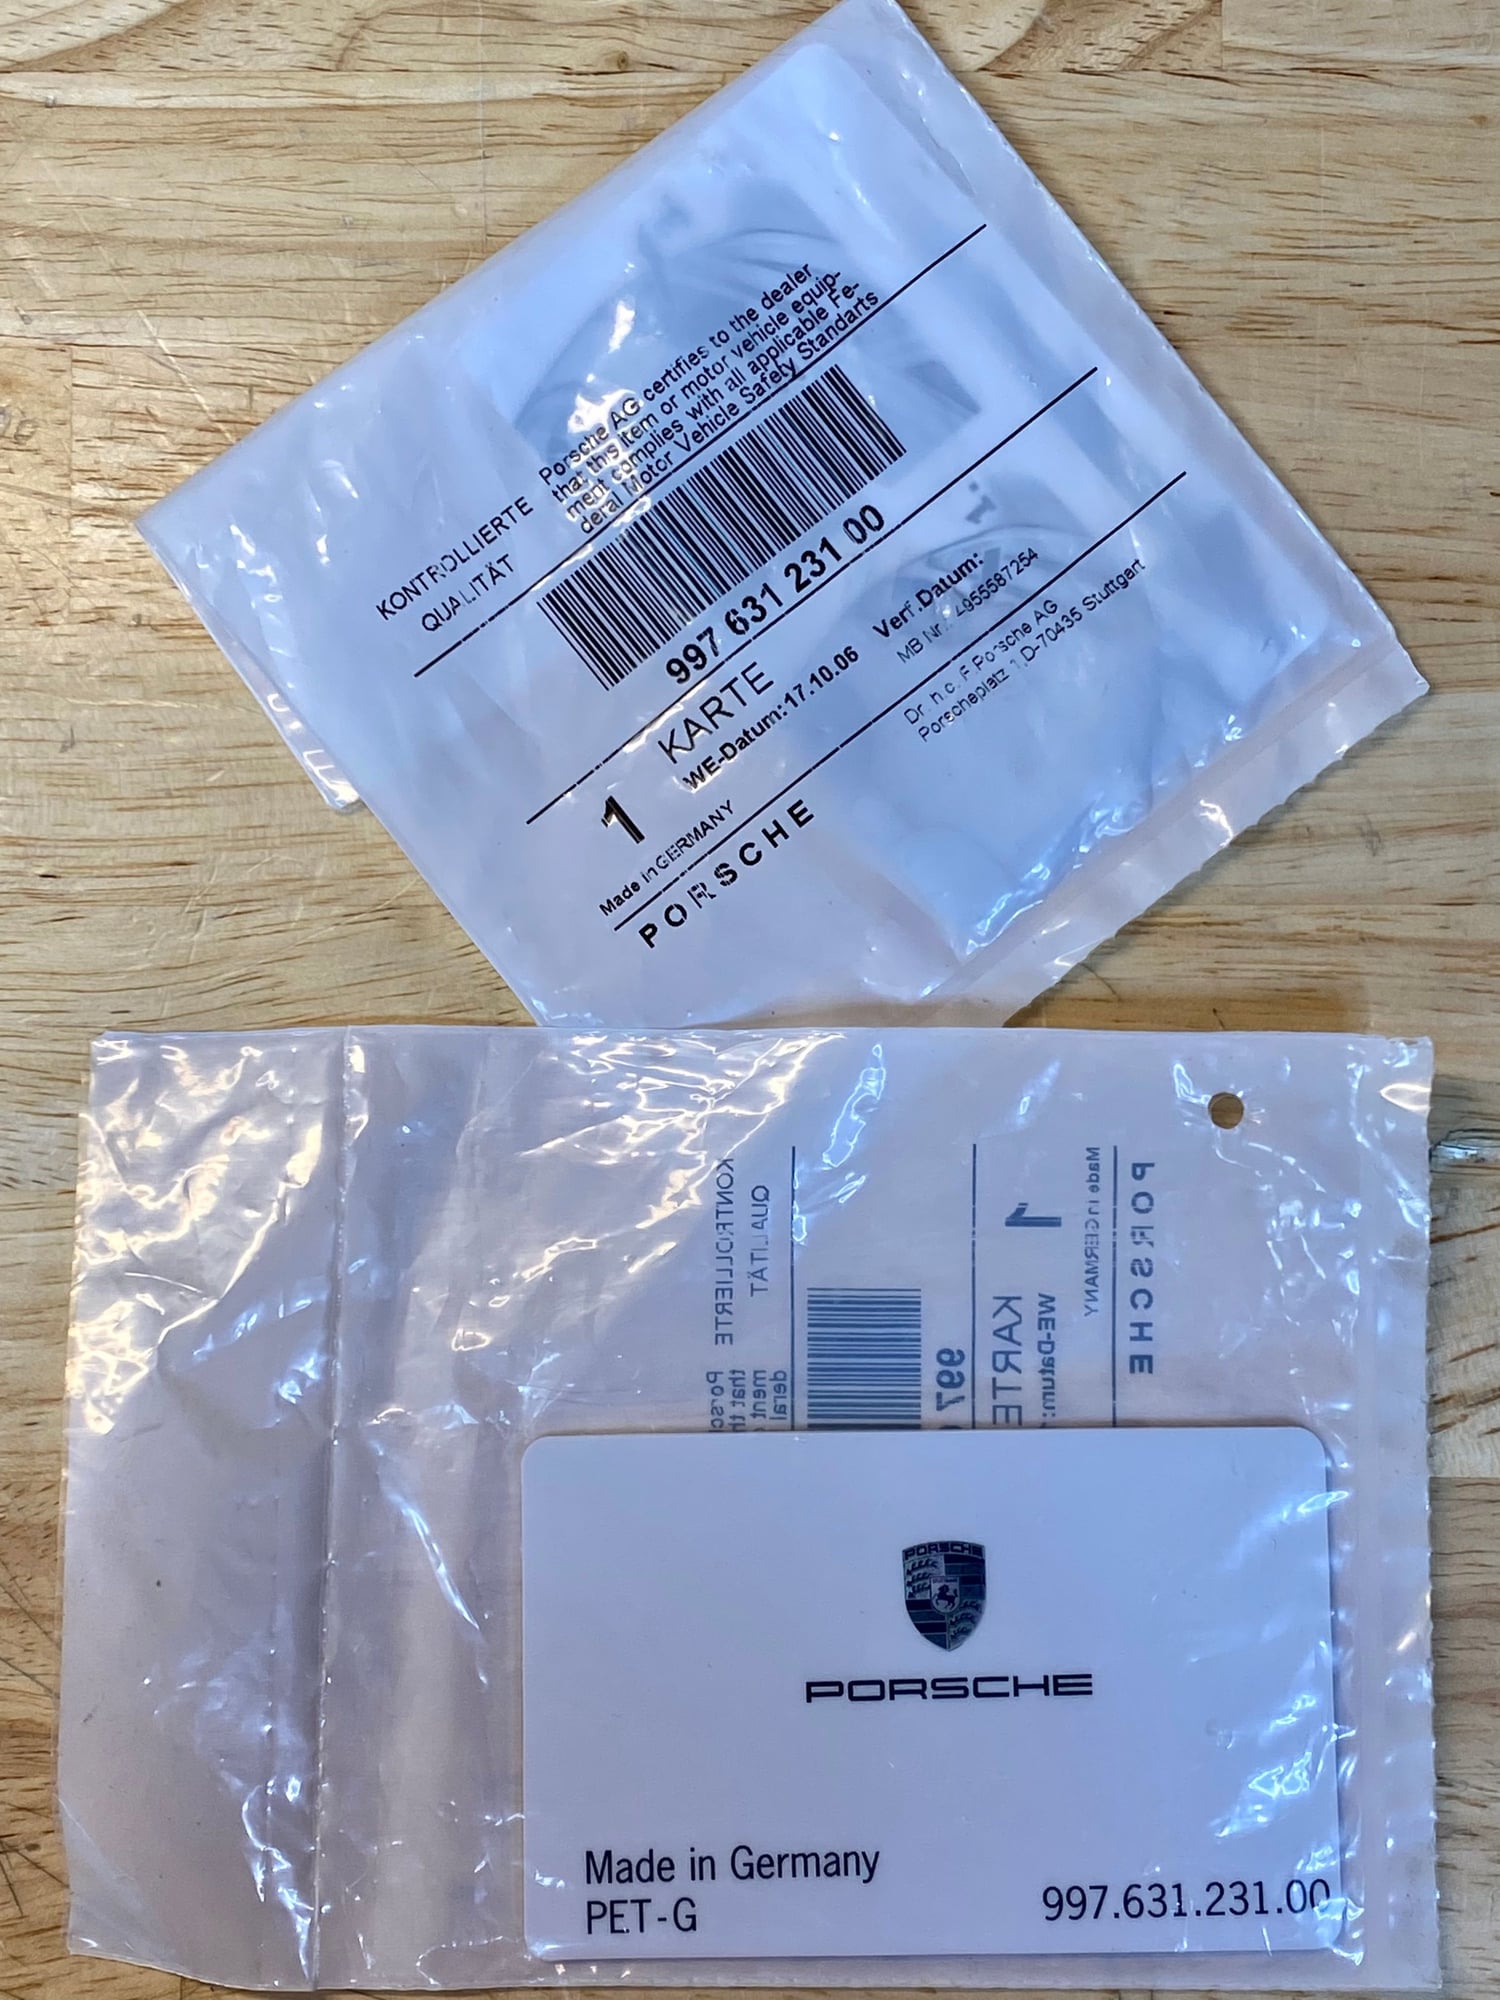 Miscellaneous - 997 (or others) Card to Release Fog lights. BNIB - New - All Years Porsche 911 - Shreveport, LA 71106, United States